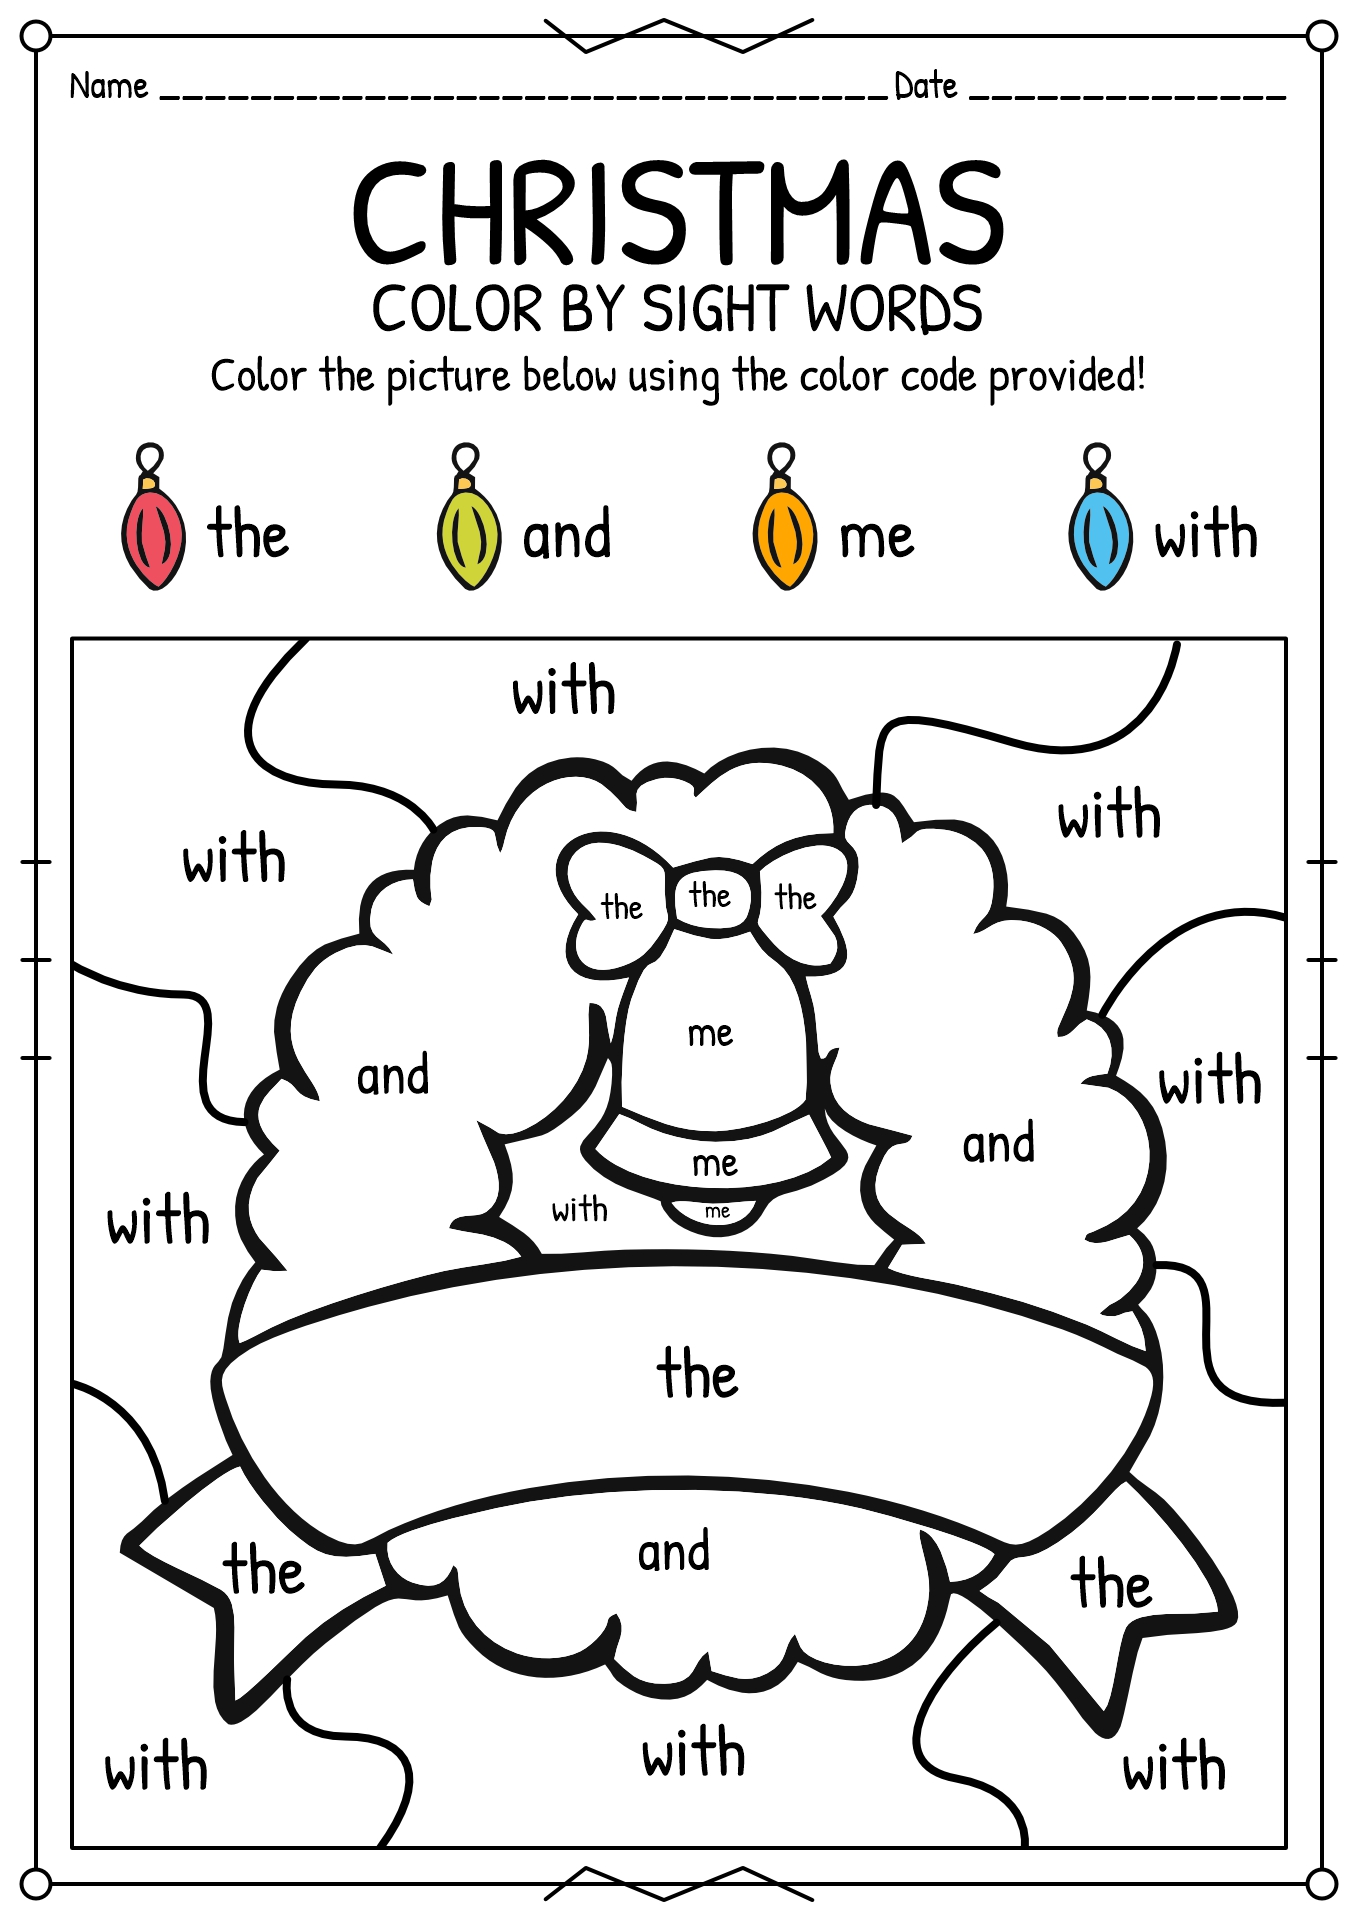 Christmas Color by Sight Word Kindergarten Image